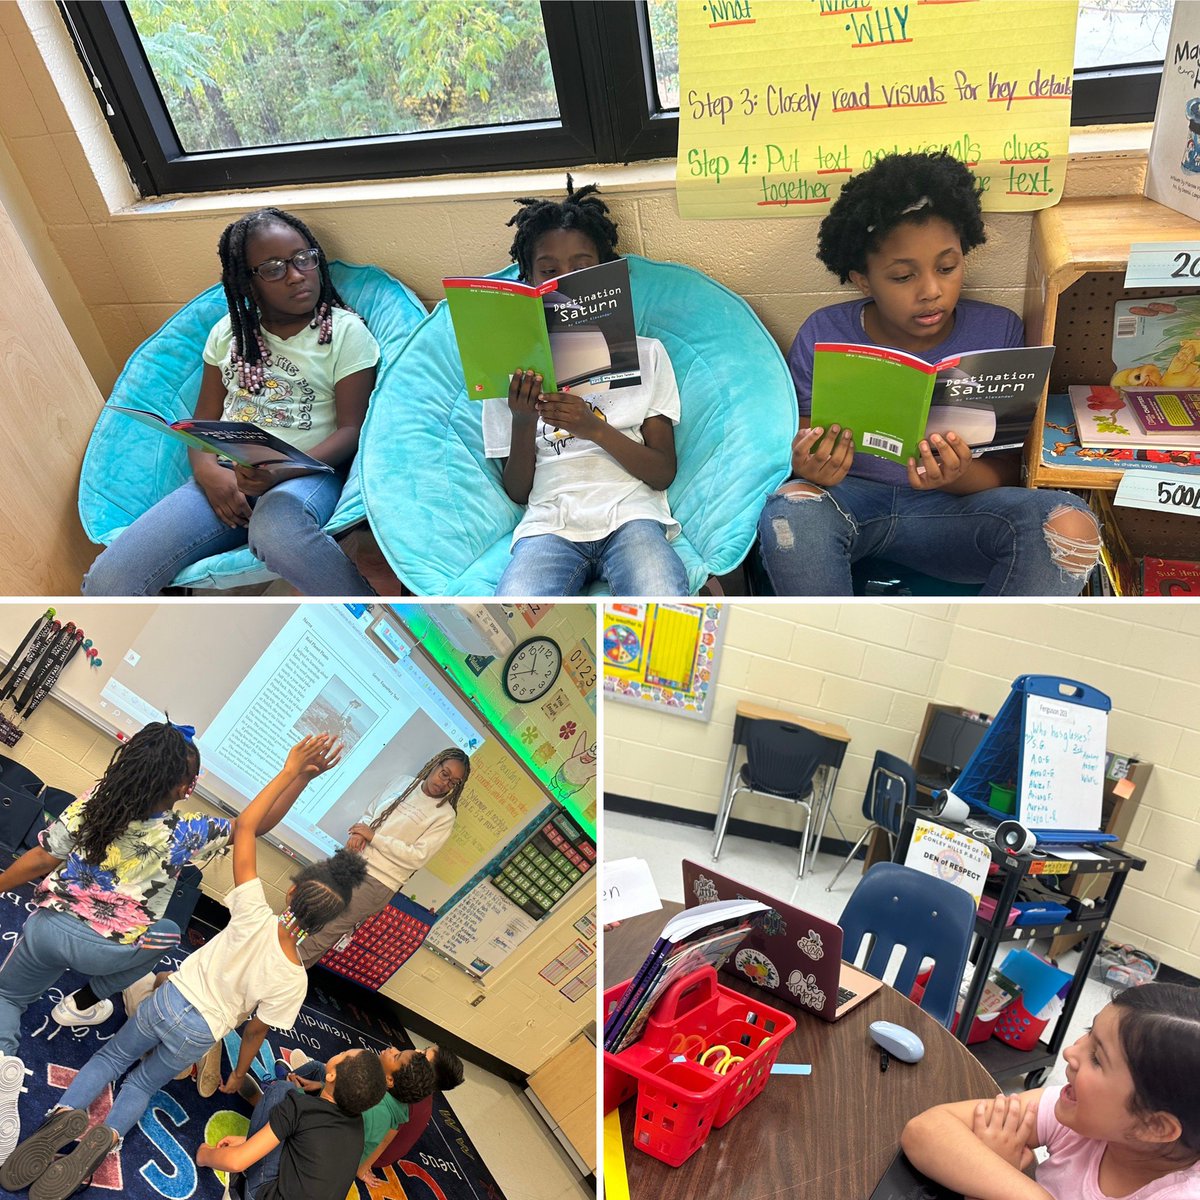 Effective instruction is HAPPENING on “THE HILL”! #Tier1instruction #IndependentReading #DirectInstruction #SmallGroup #Collaboration #StudentEngagement AND SO MUCH MORE!